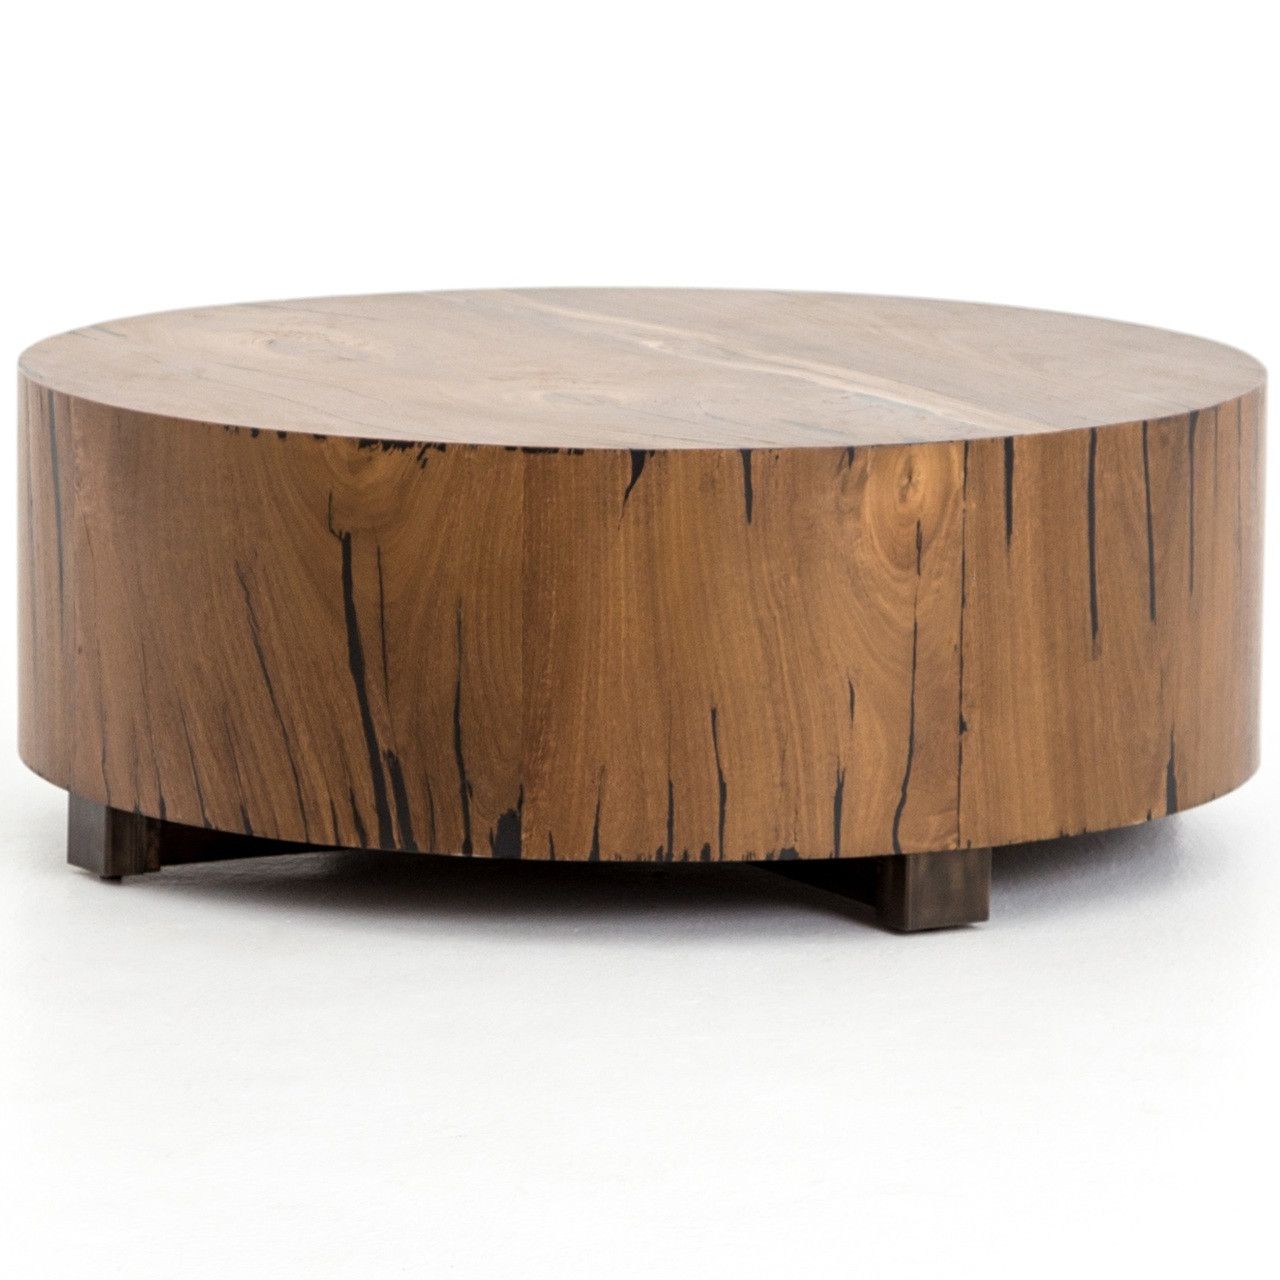 Coffee Tables With Round Wooden Tops Inside Newest Hudson Round Natural Yukas Wood Block Coffee Table (View 5 of 15)